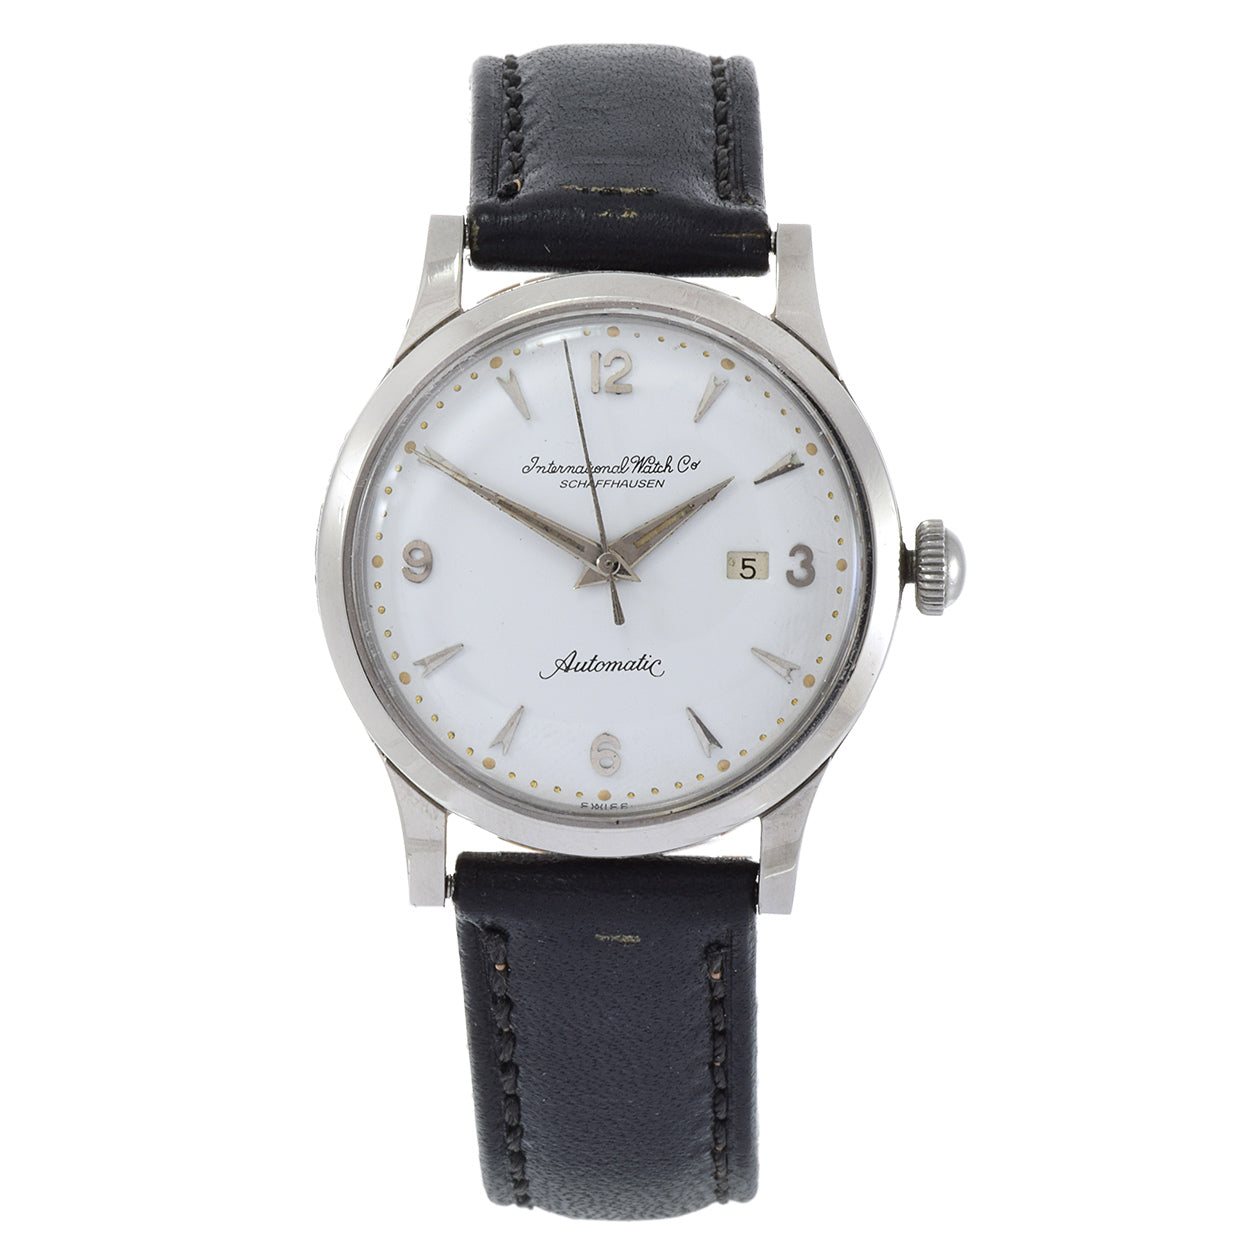 Vintage 1960's IWC Automatic watch